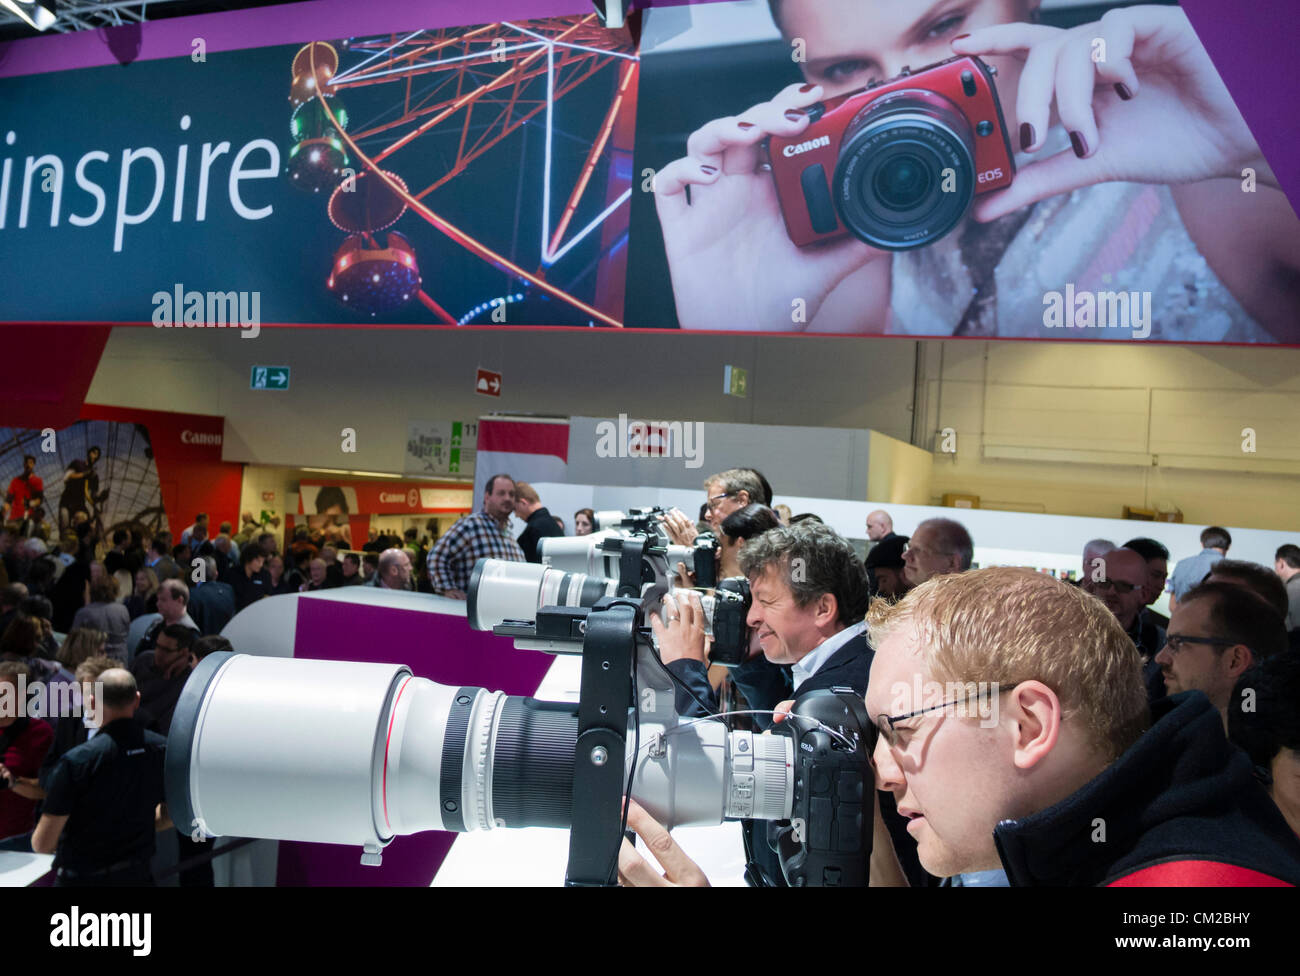 Visitors to the Canon stand try out a selection of large telephoto lenses on the second day of bi-annual Photokina photography and imaging trade fair held in Cologne Germany; Wednesday 19 September 2012. Stock Photo